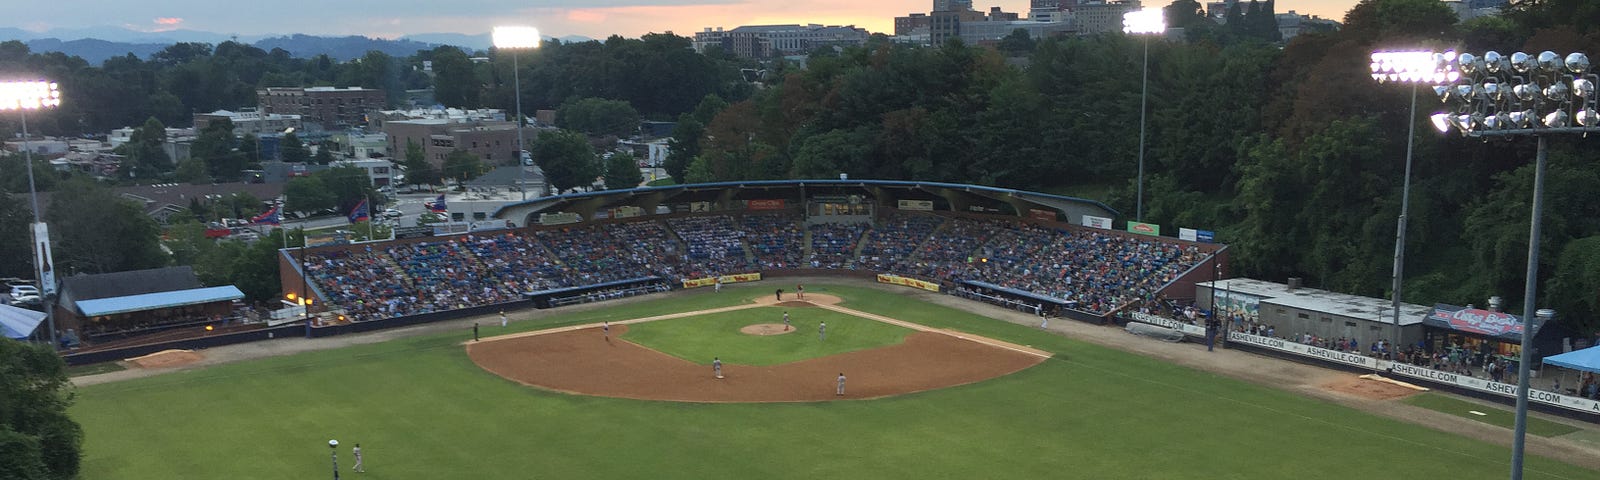 Asheville NC minor league baseball team called the Tourists and